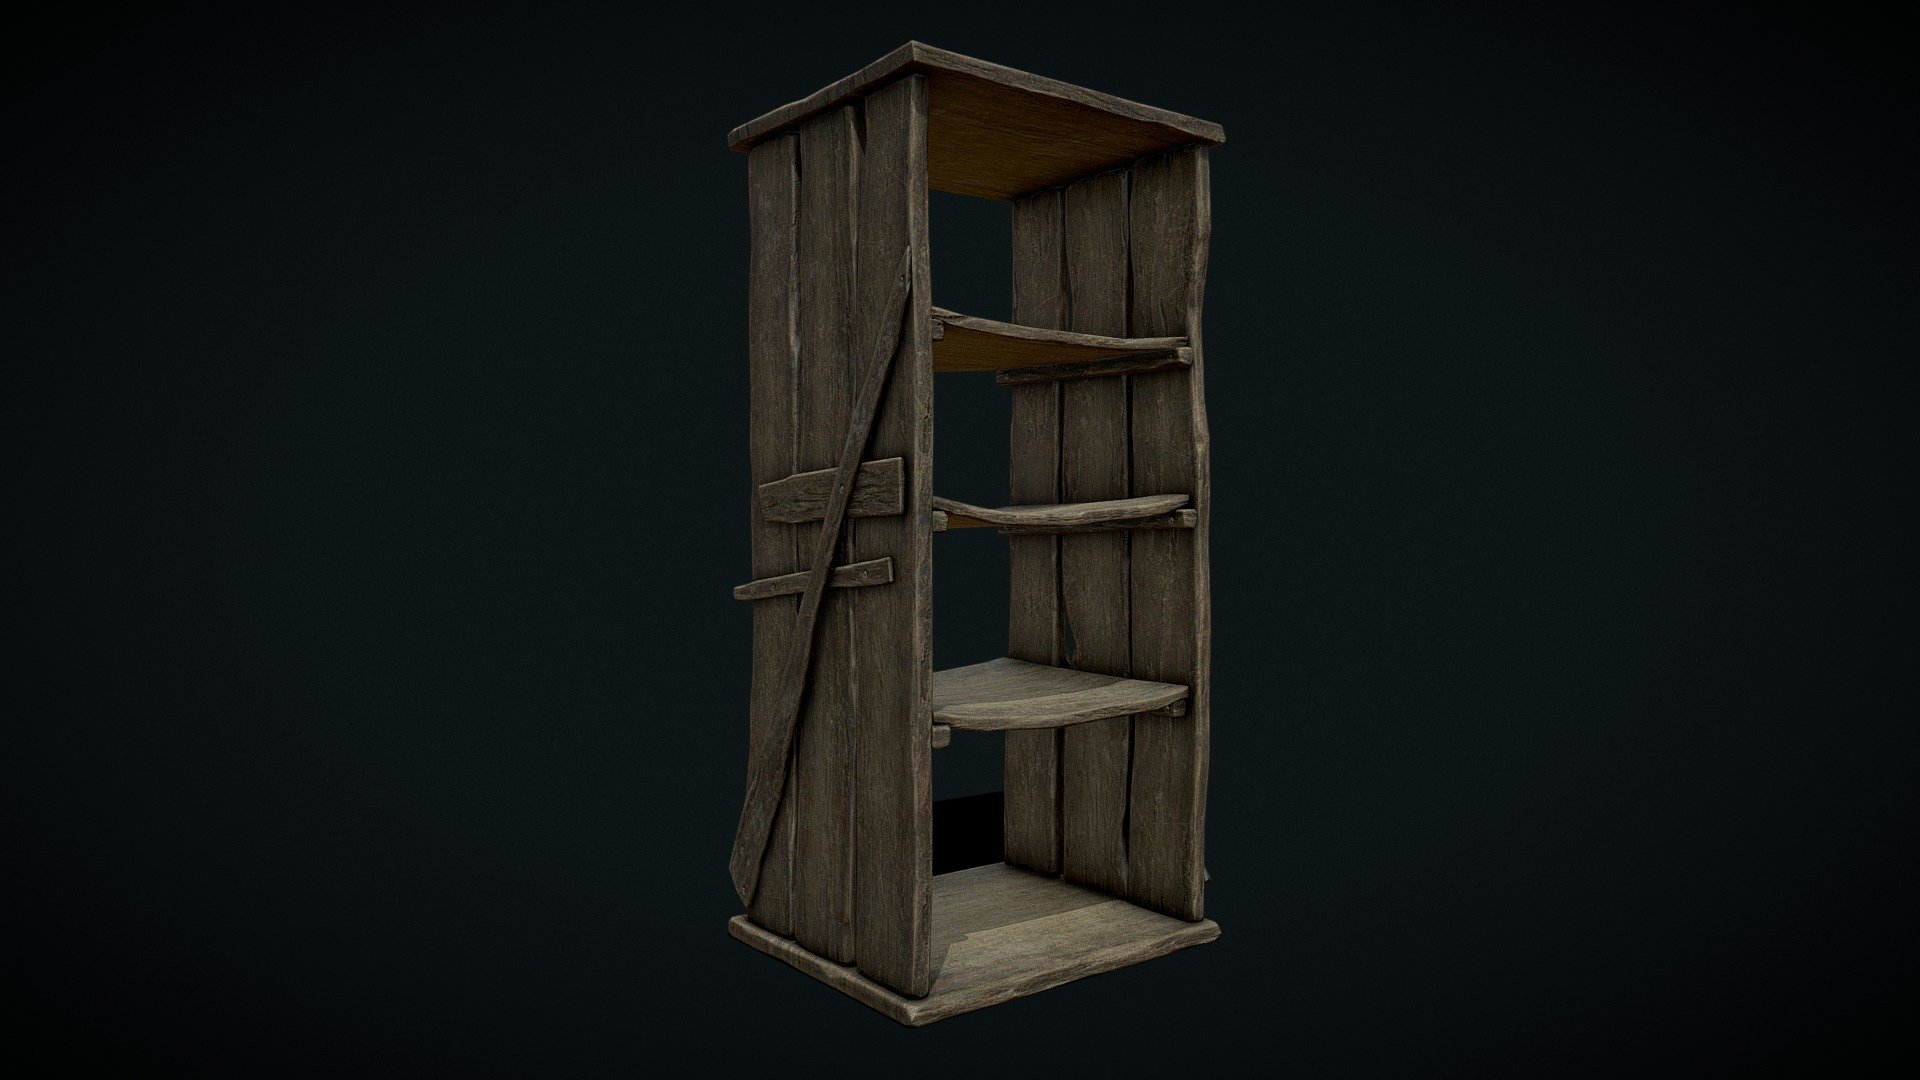 Free to everyone to use for anything. All I ask is that you consider me for your 3D projects! You can contact me at OliverTriplett3D@gmail.com - Tall Wooden Medieval Shelf - Download Free 3D model by Oliver Triplett (@OliverTriplett) 3d model